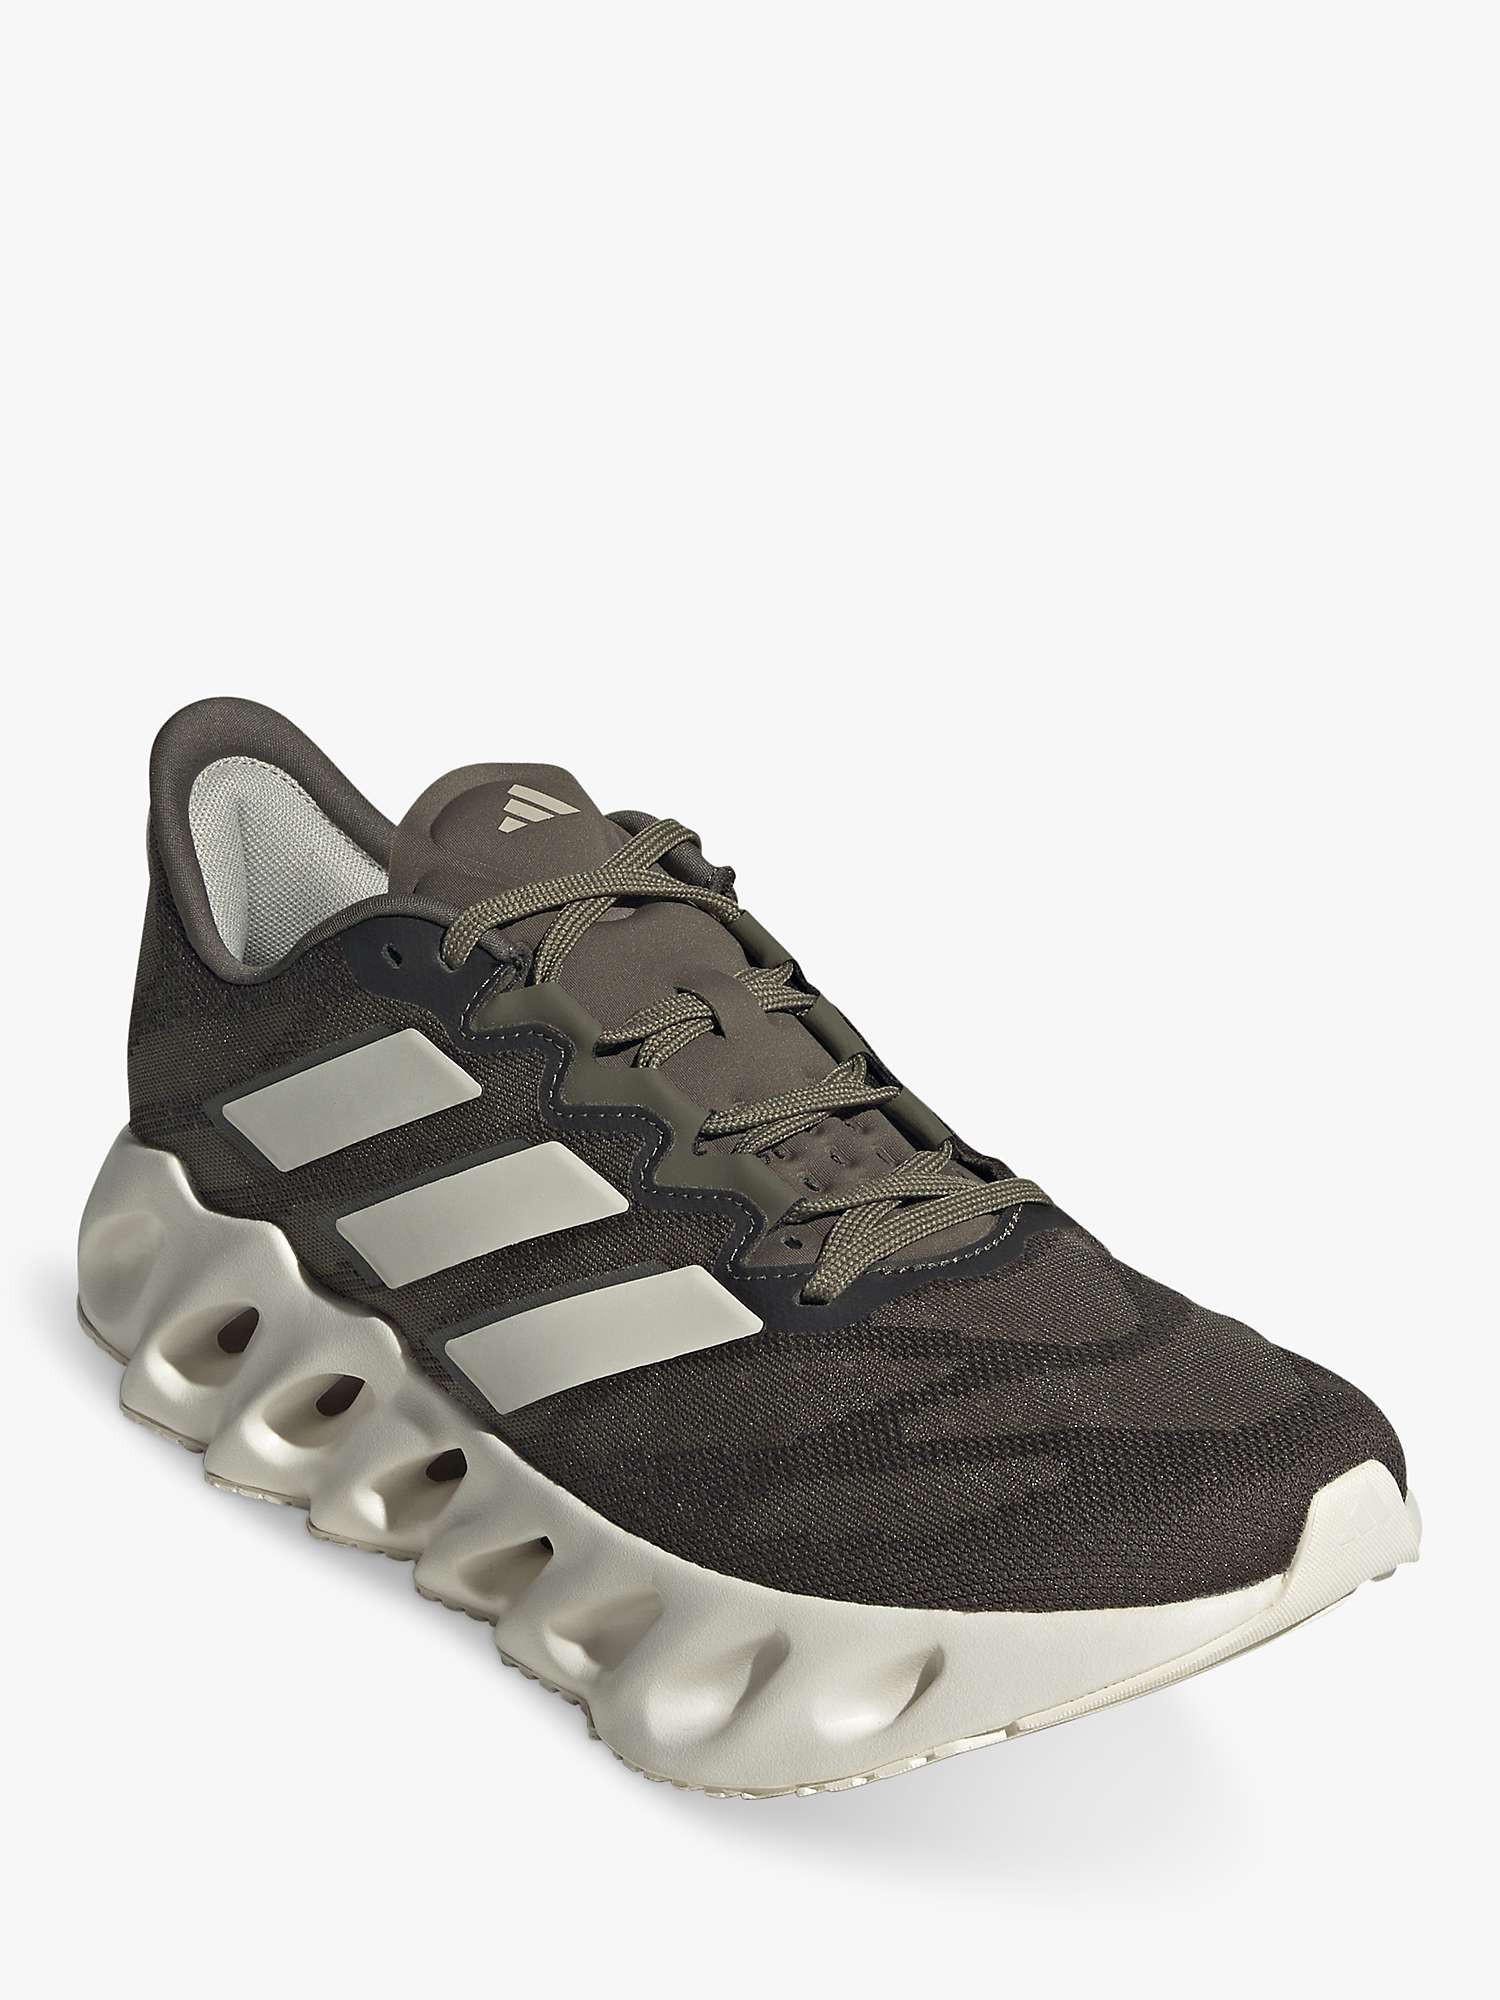 Buy adidas Switch FWD Men's Running Shoes Online at johnlewis.com